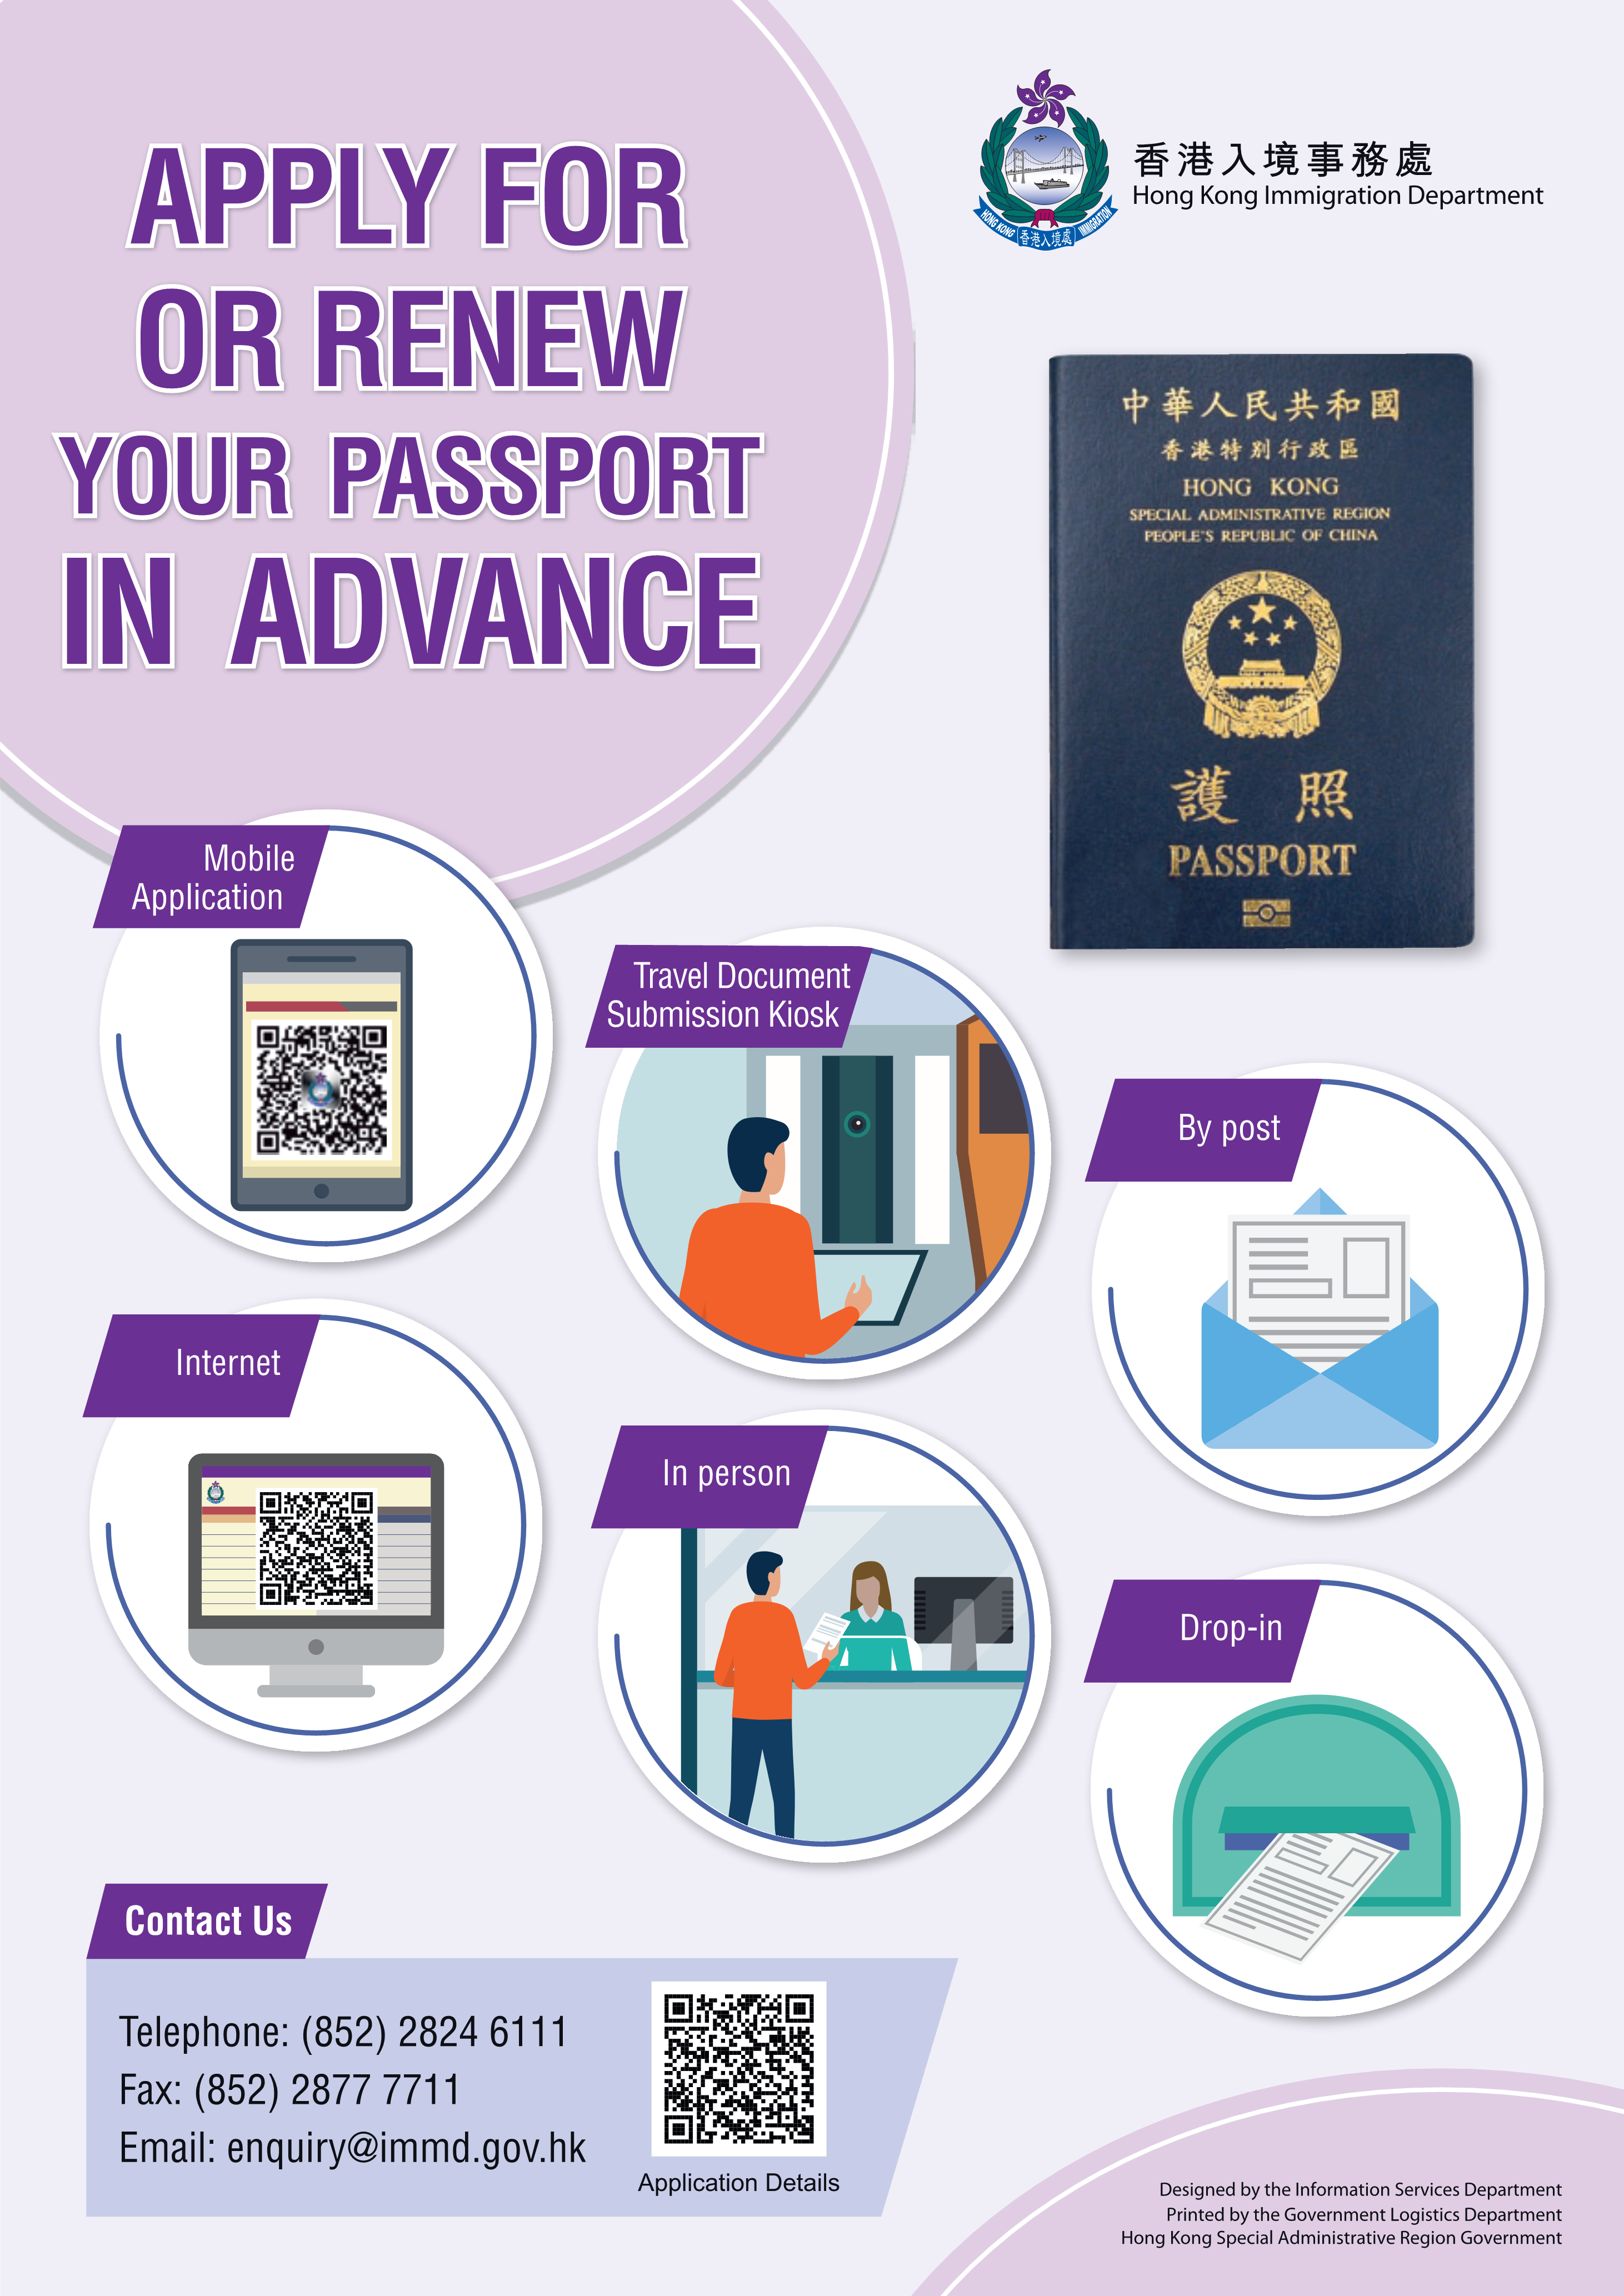 Apply For or Renew Your Passport in Advance